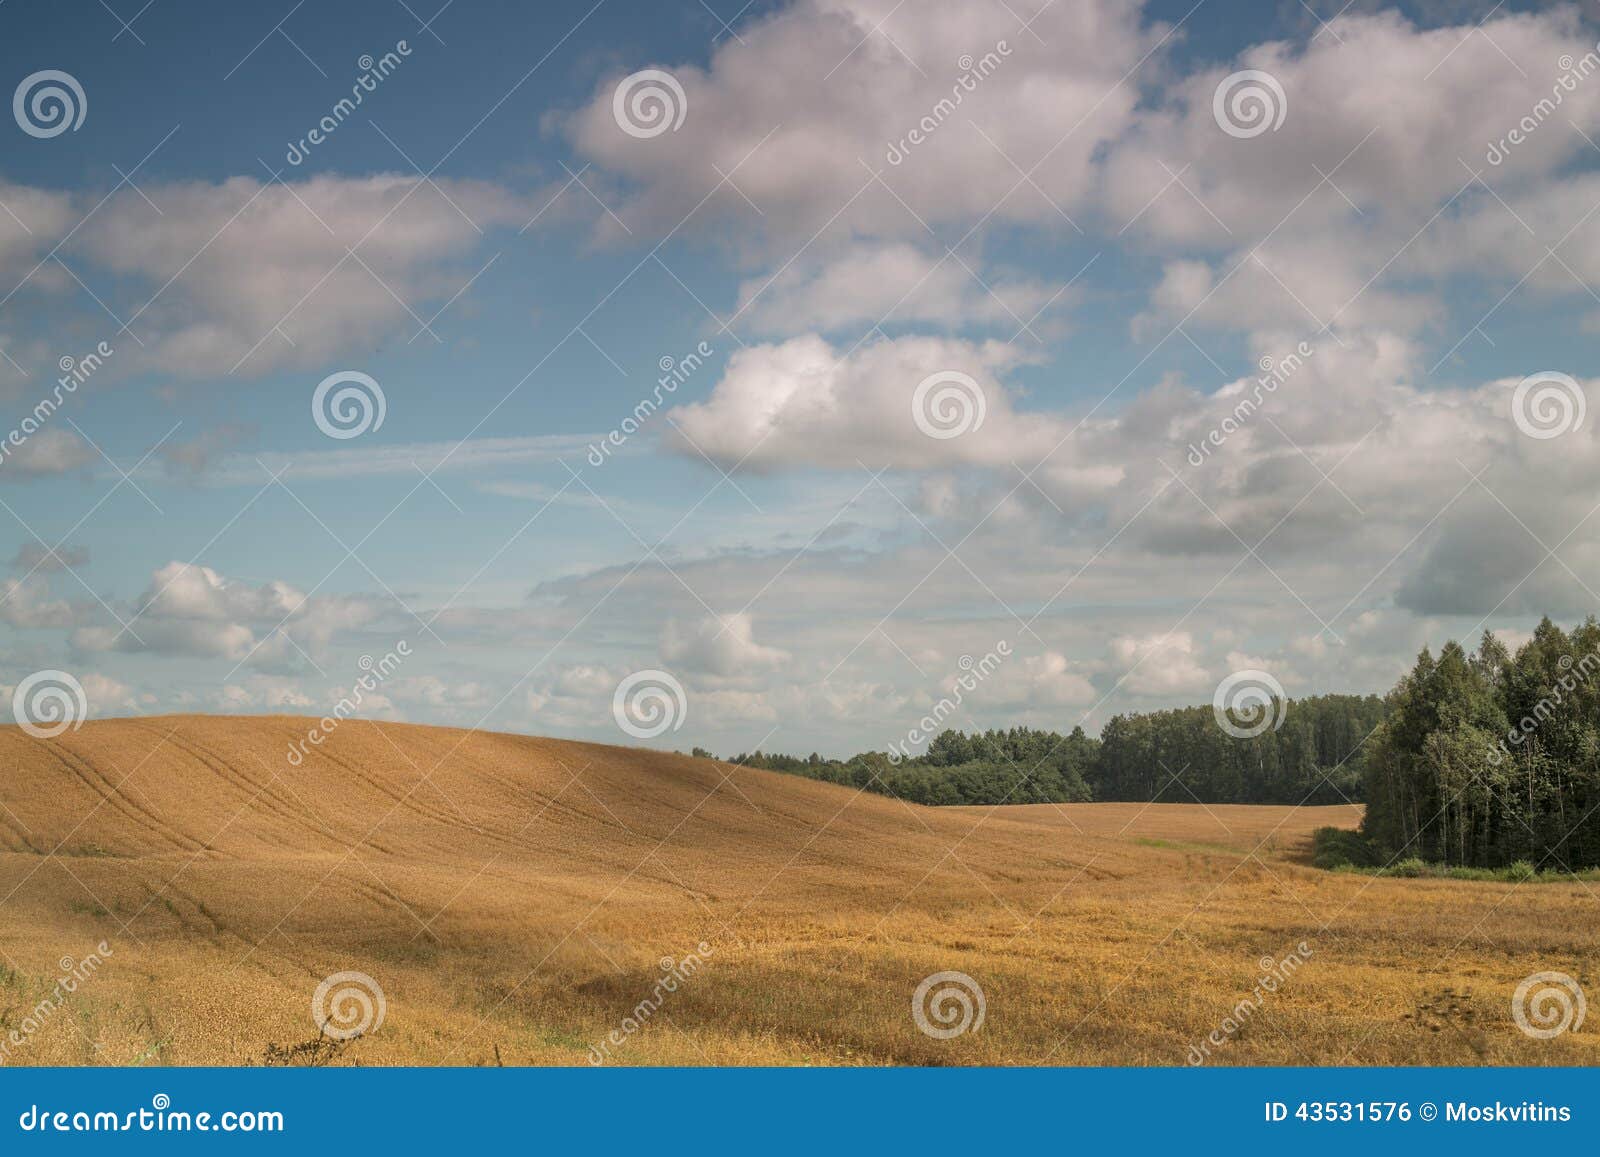 sloping montainous field in the country side with white beautiful clouds